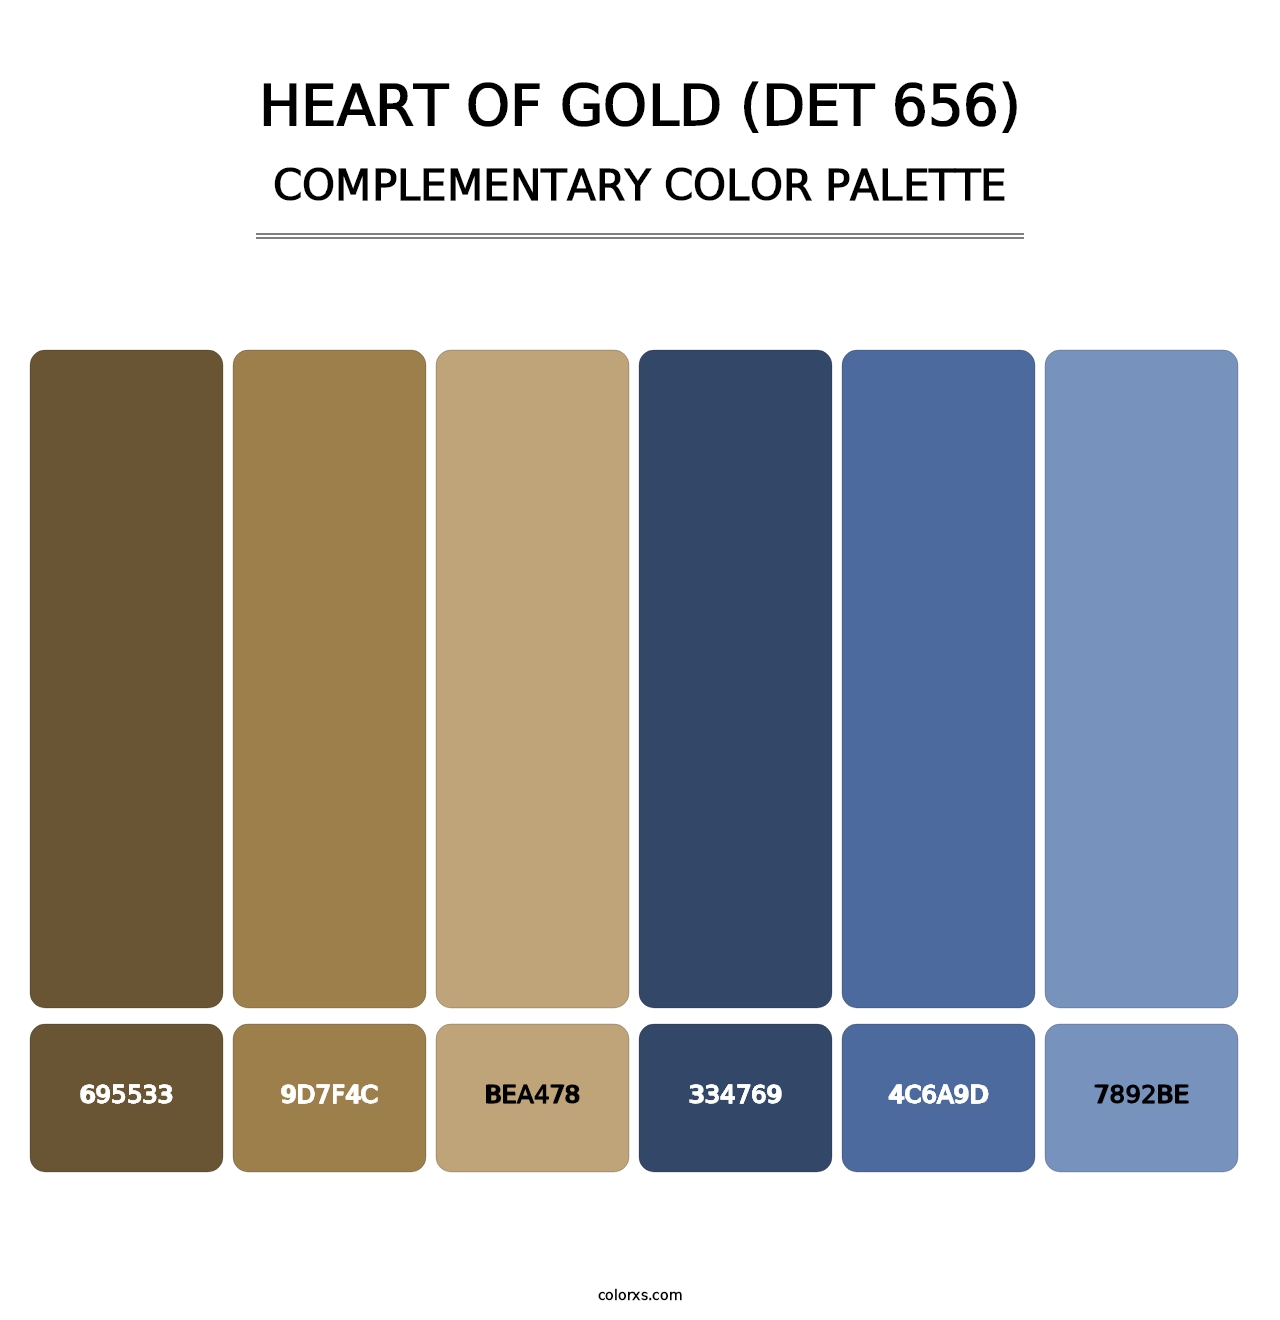 Heart of Gold (DET 656) - Complementary Color Palette